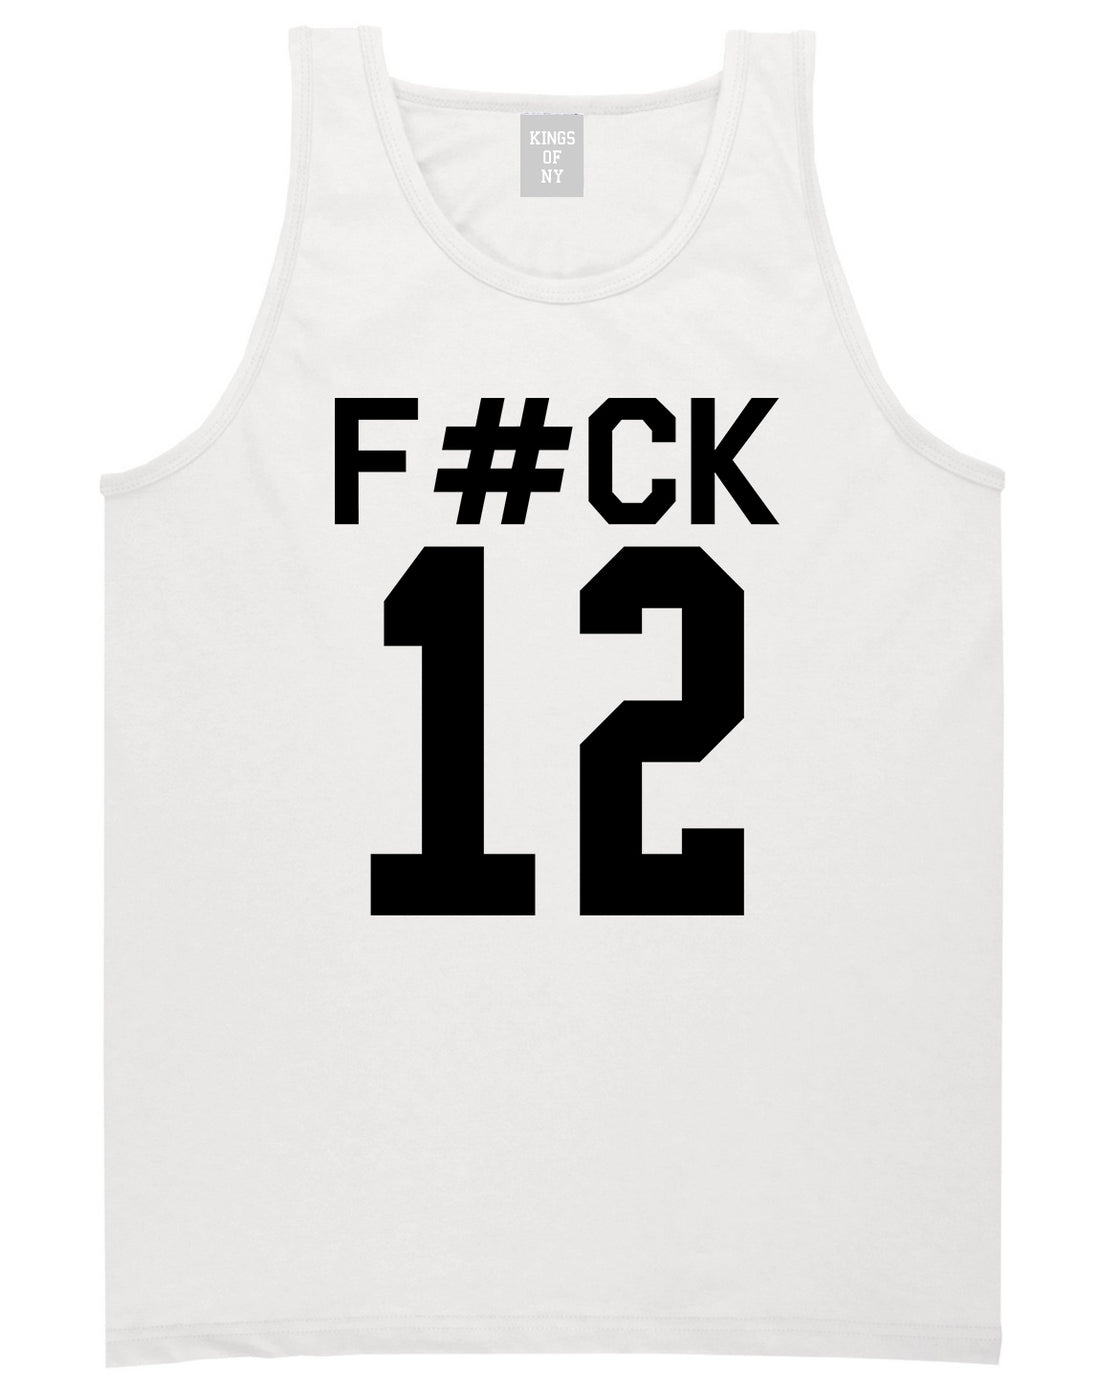 Fck 12 Police Brutality Mens Tank Top Shirt White by Kings Of NY